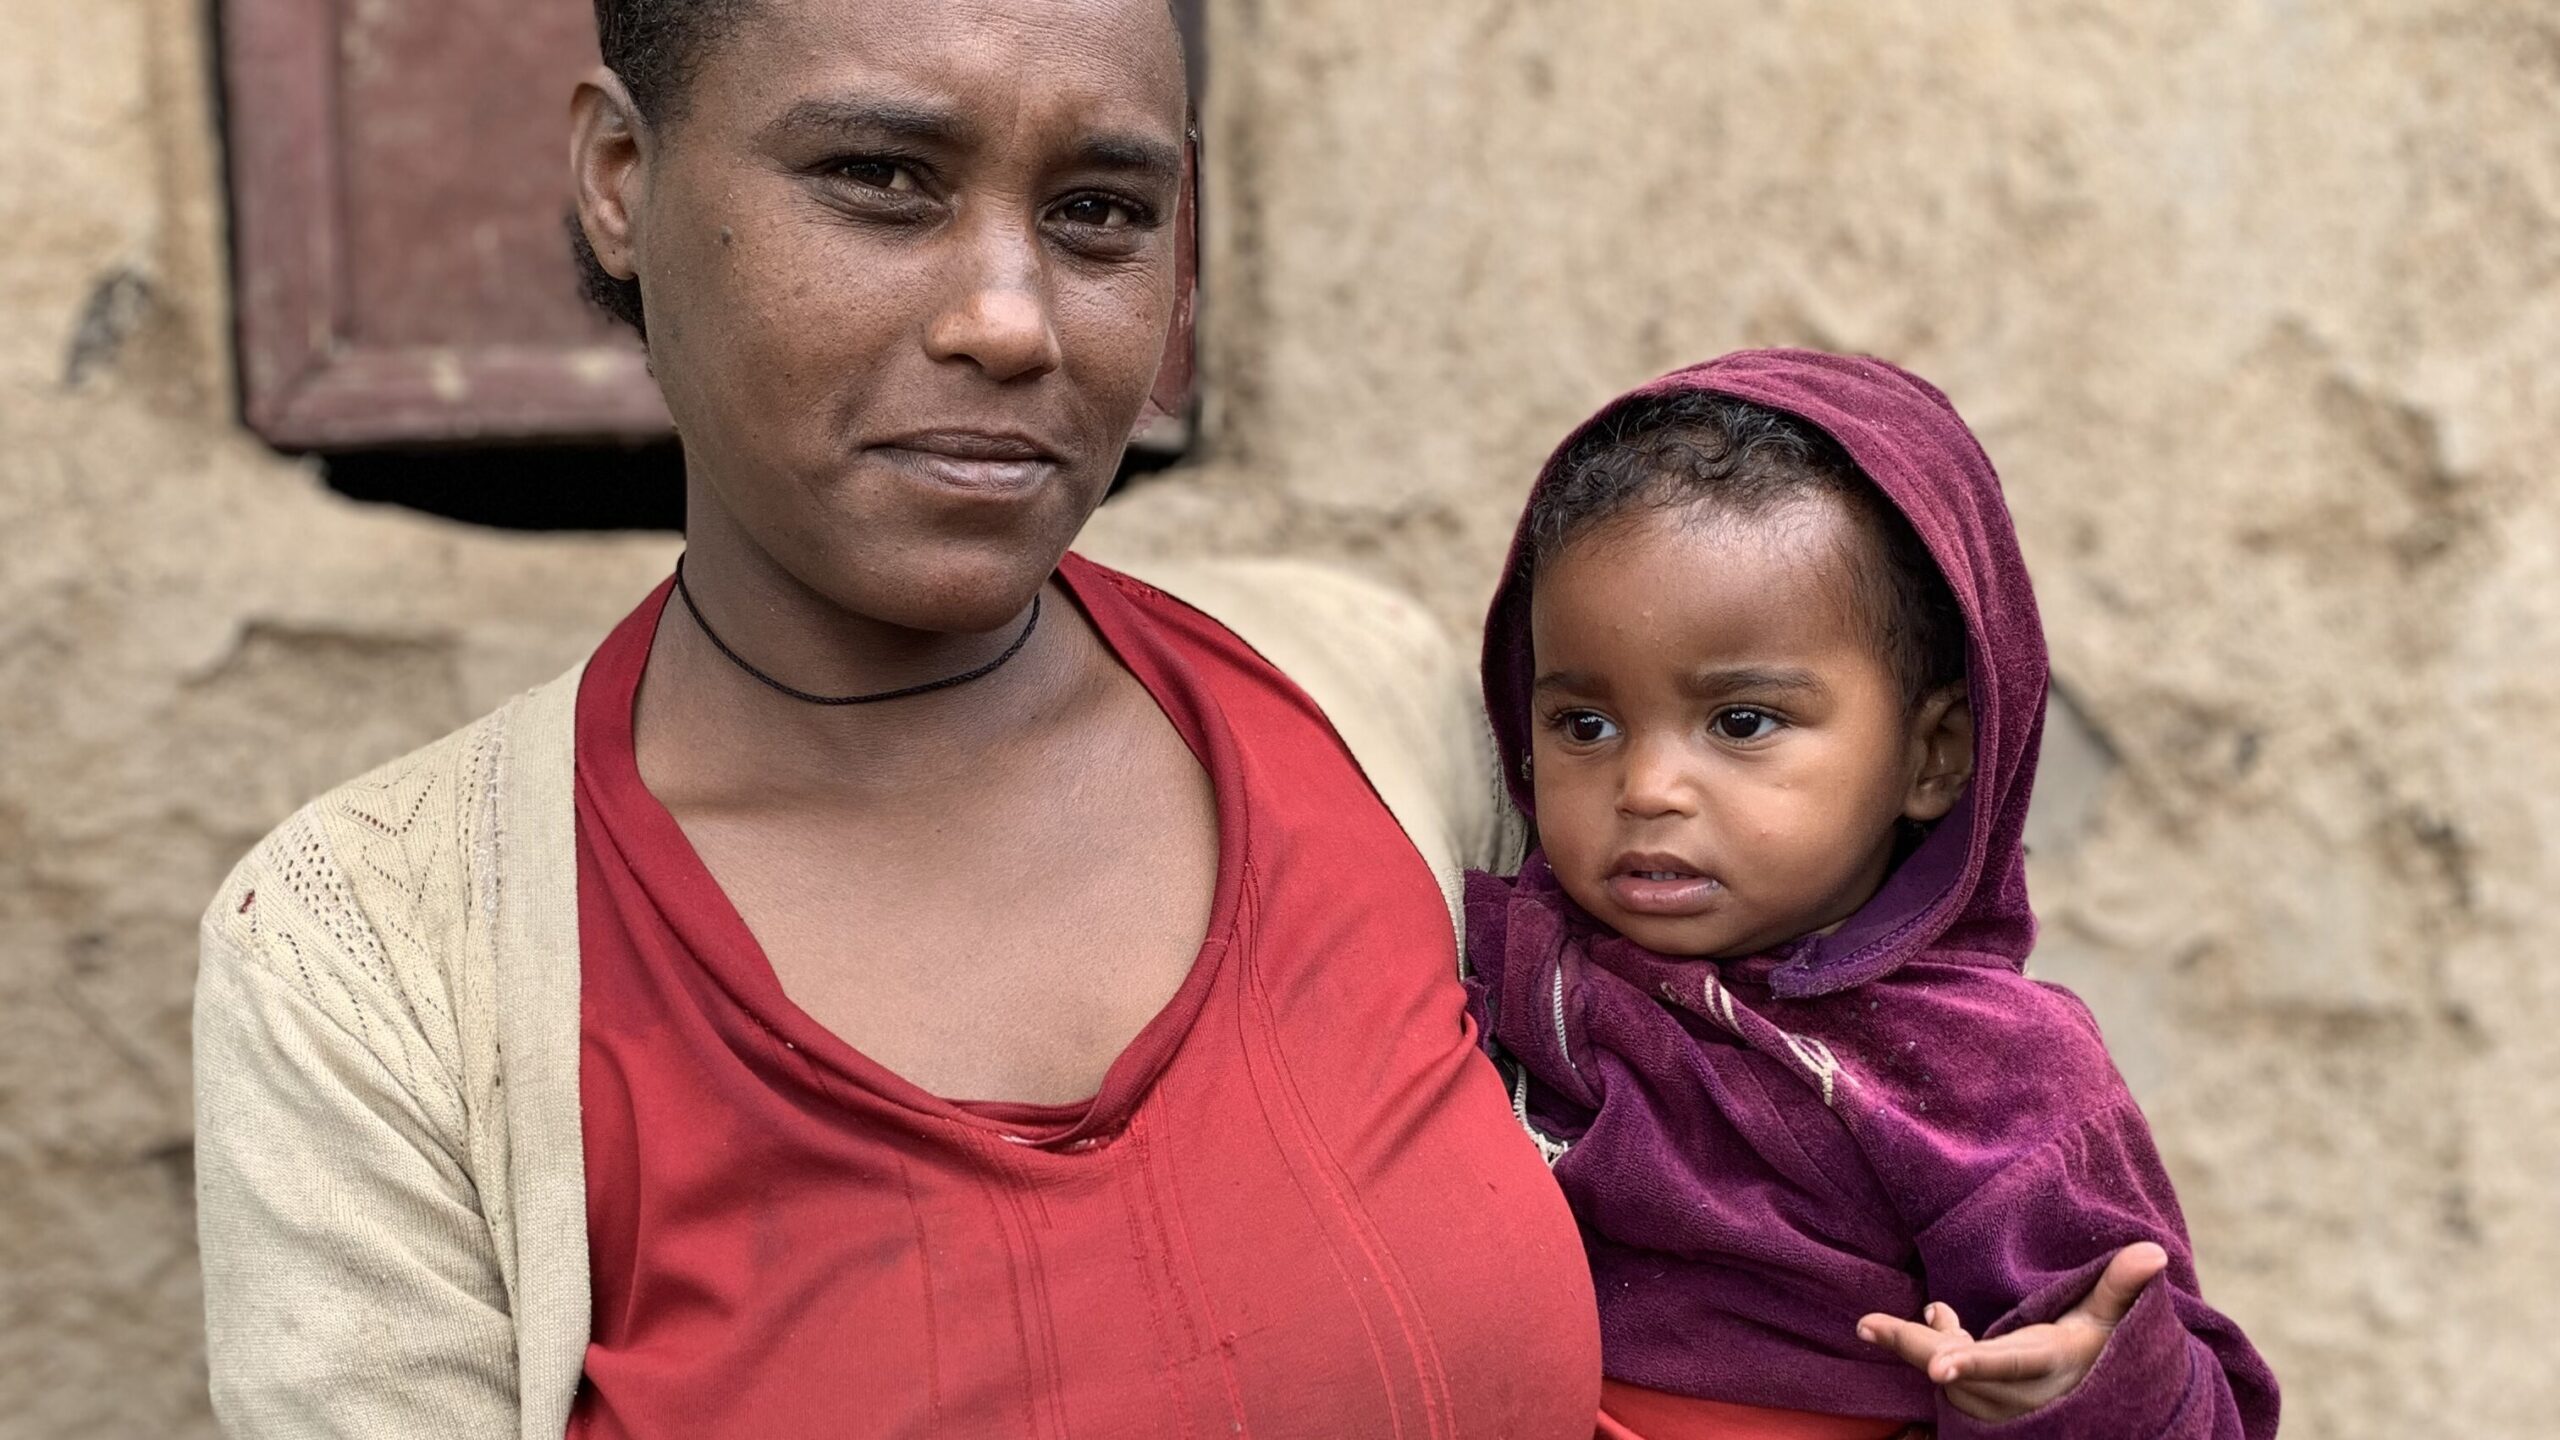 Ethiopian mother with child